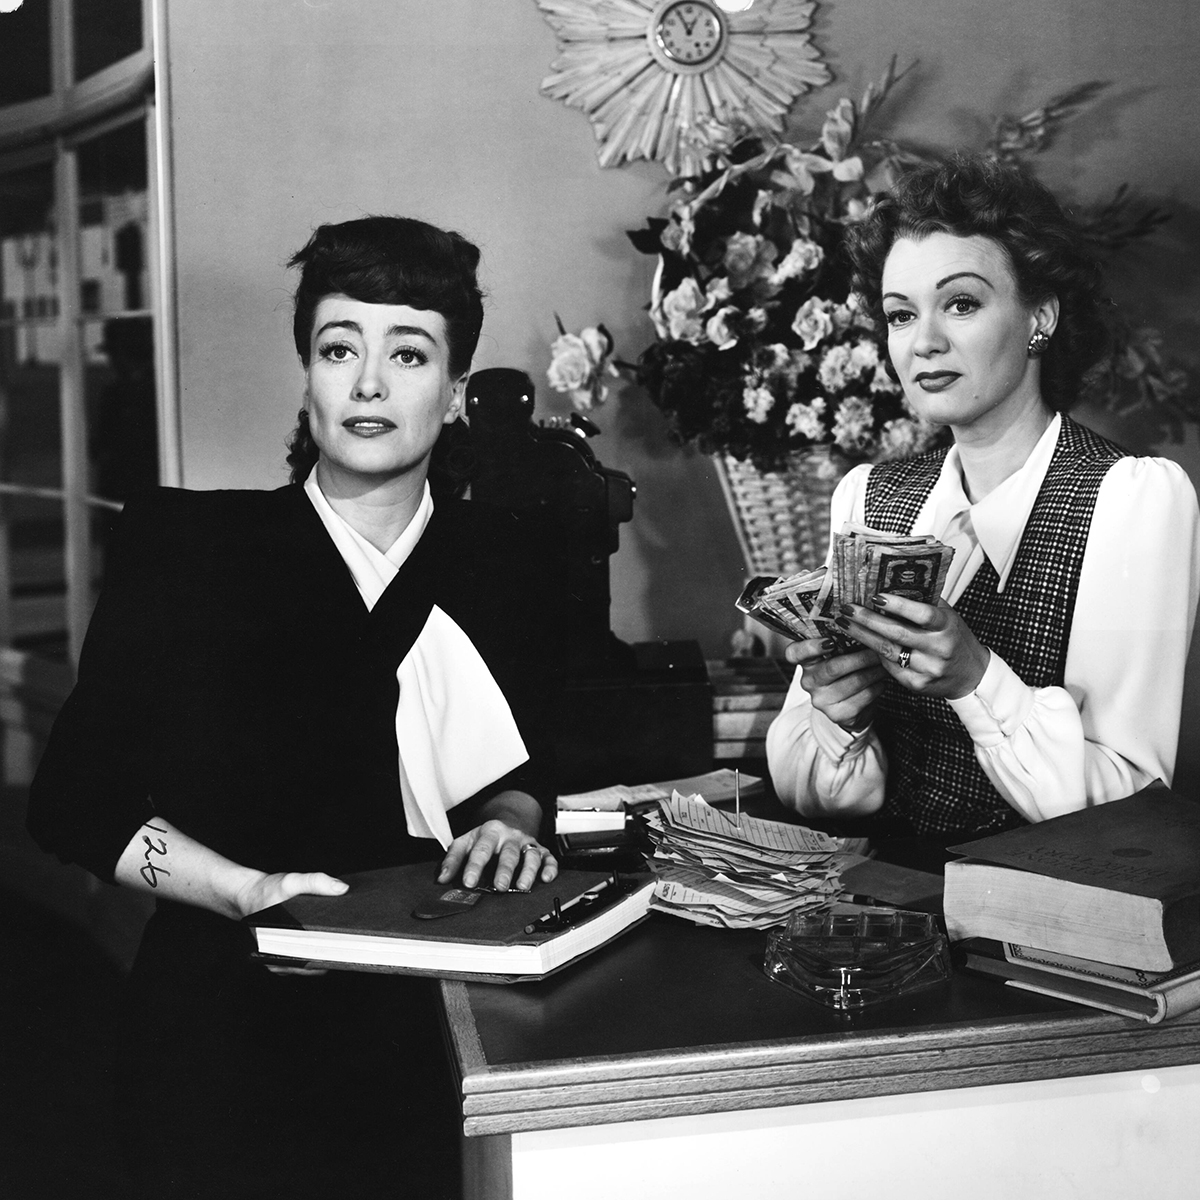 Would you want to work for Eve Arden? She seems like a fun boss!  #TCMParty